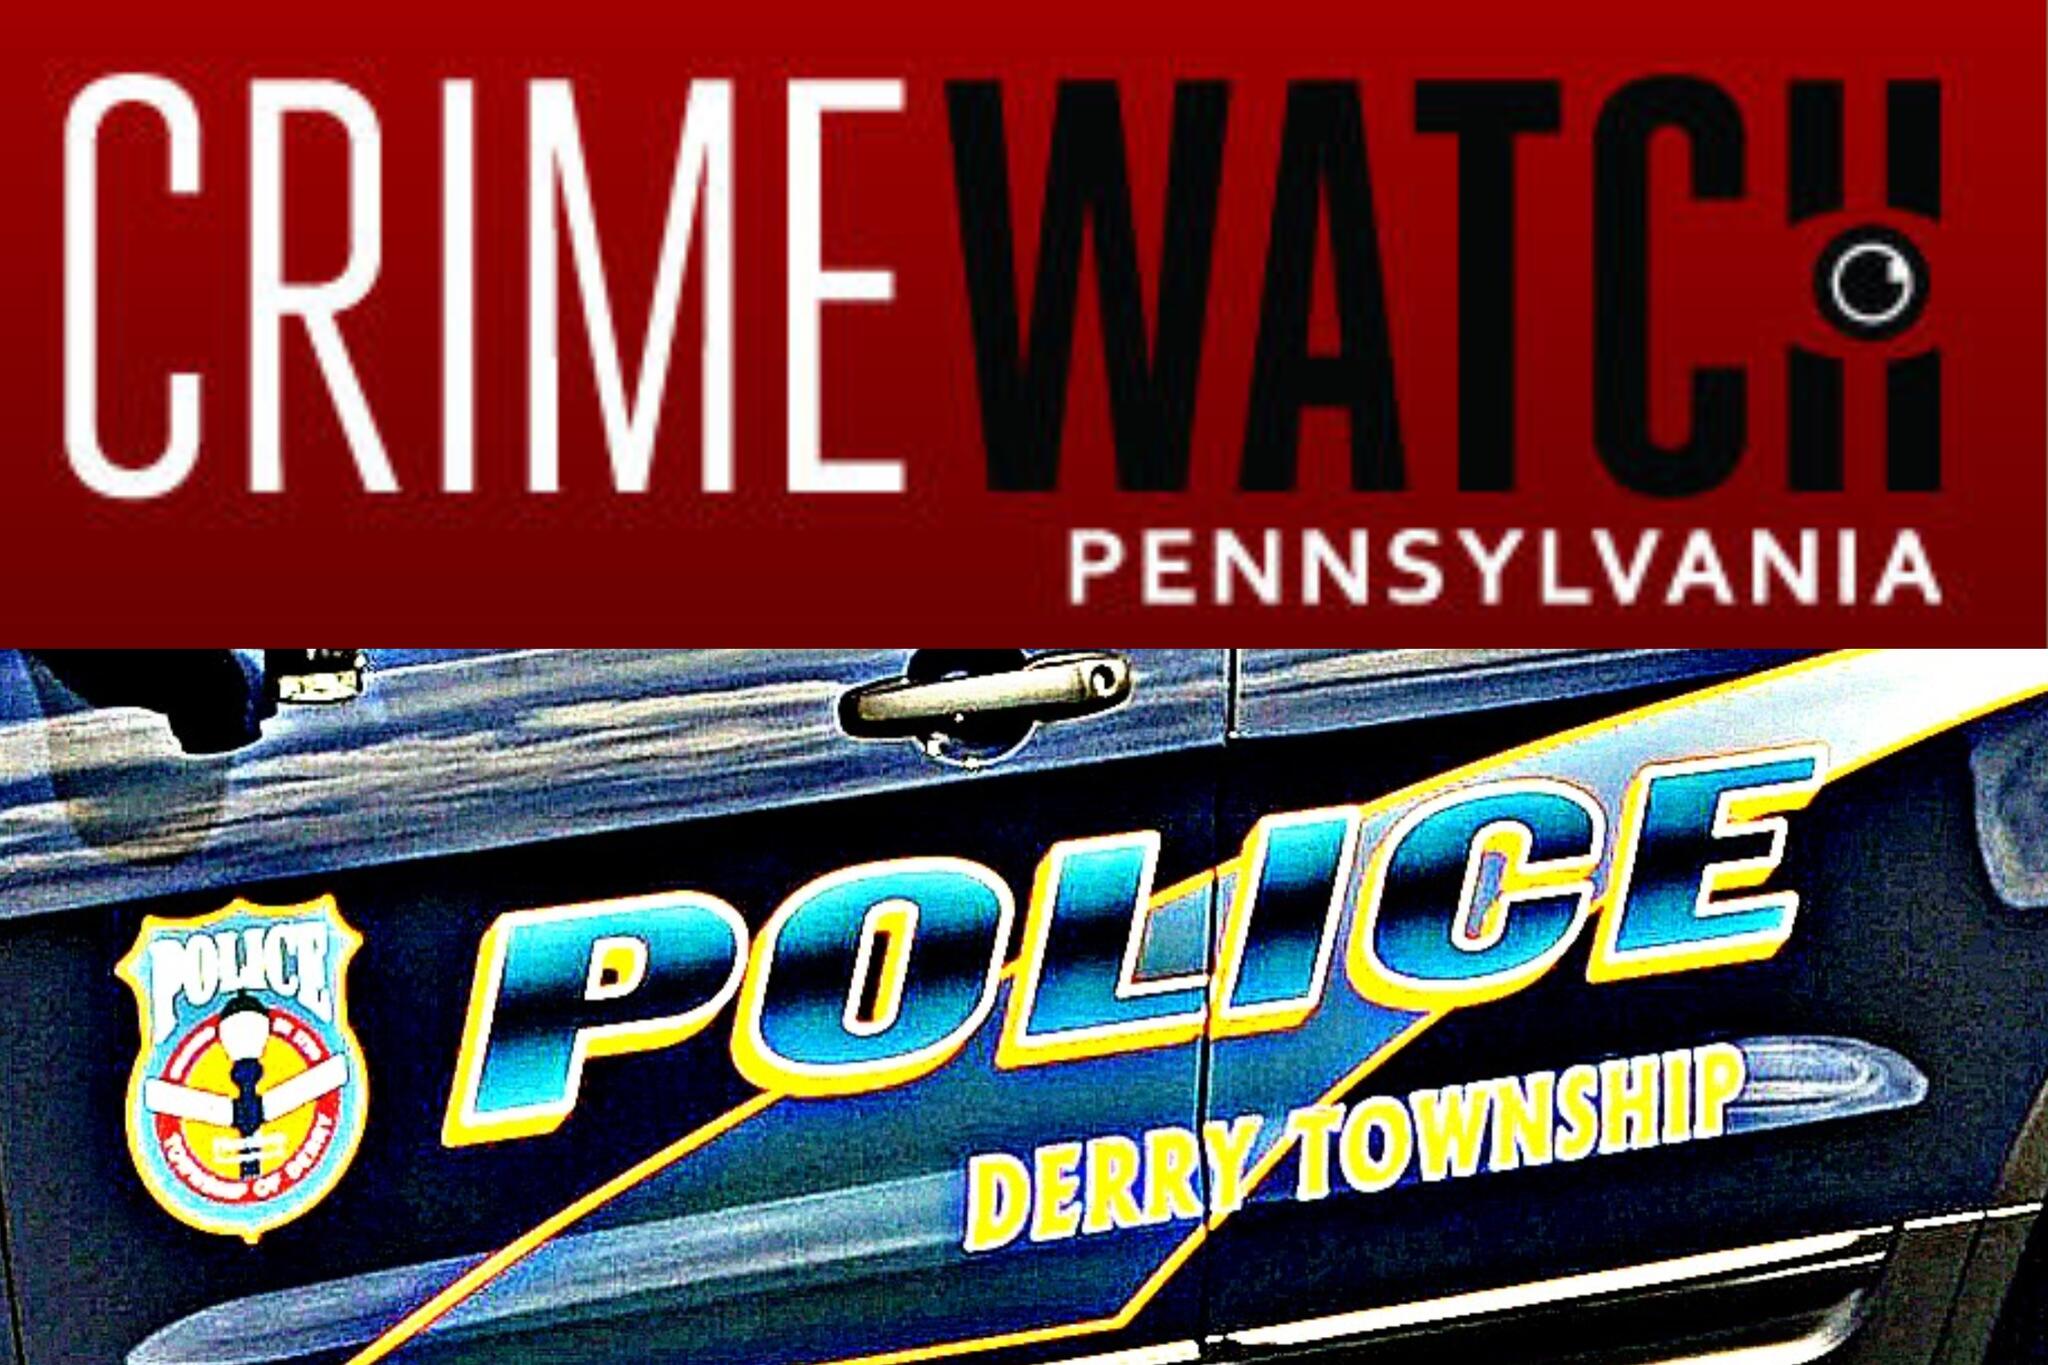 derry township police